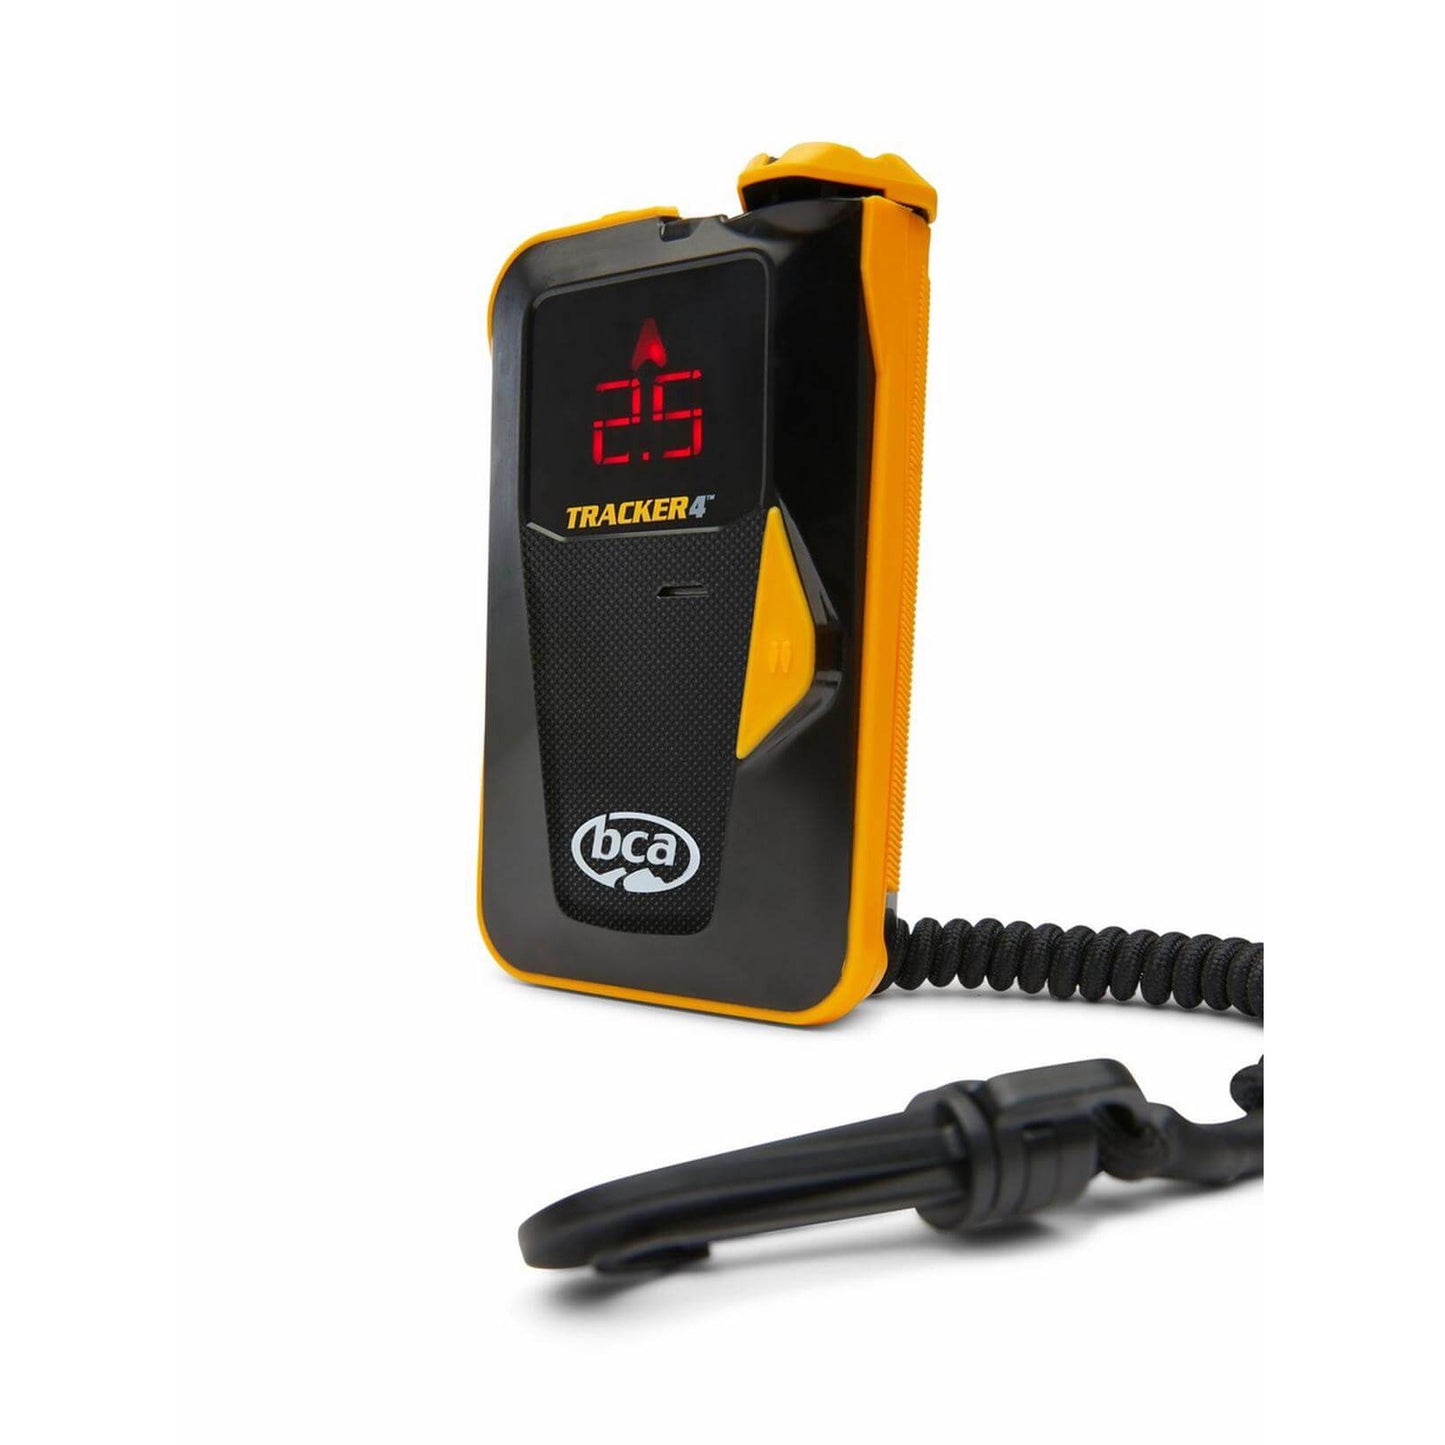 BCA Tracker 'T4' Digital Avalanche Transceiver for Ultimate Safety with 5 Year Warranty